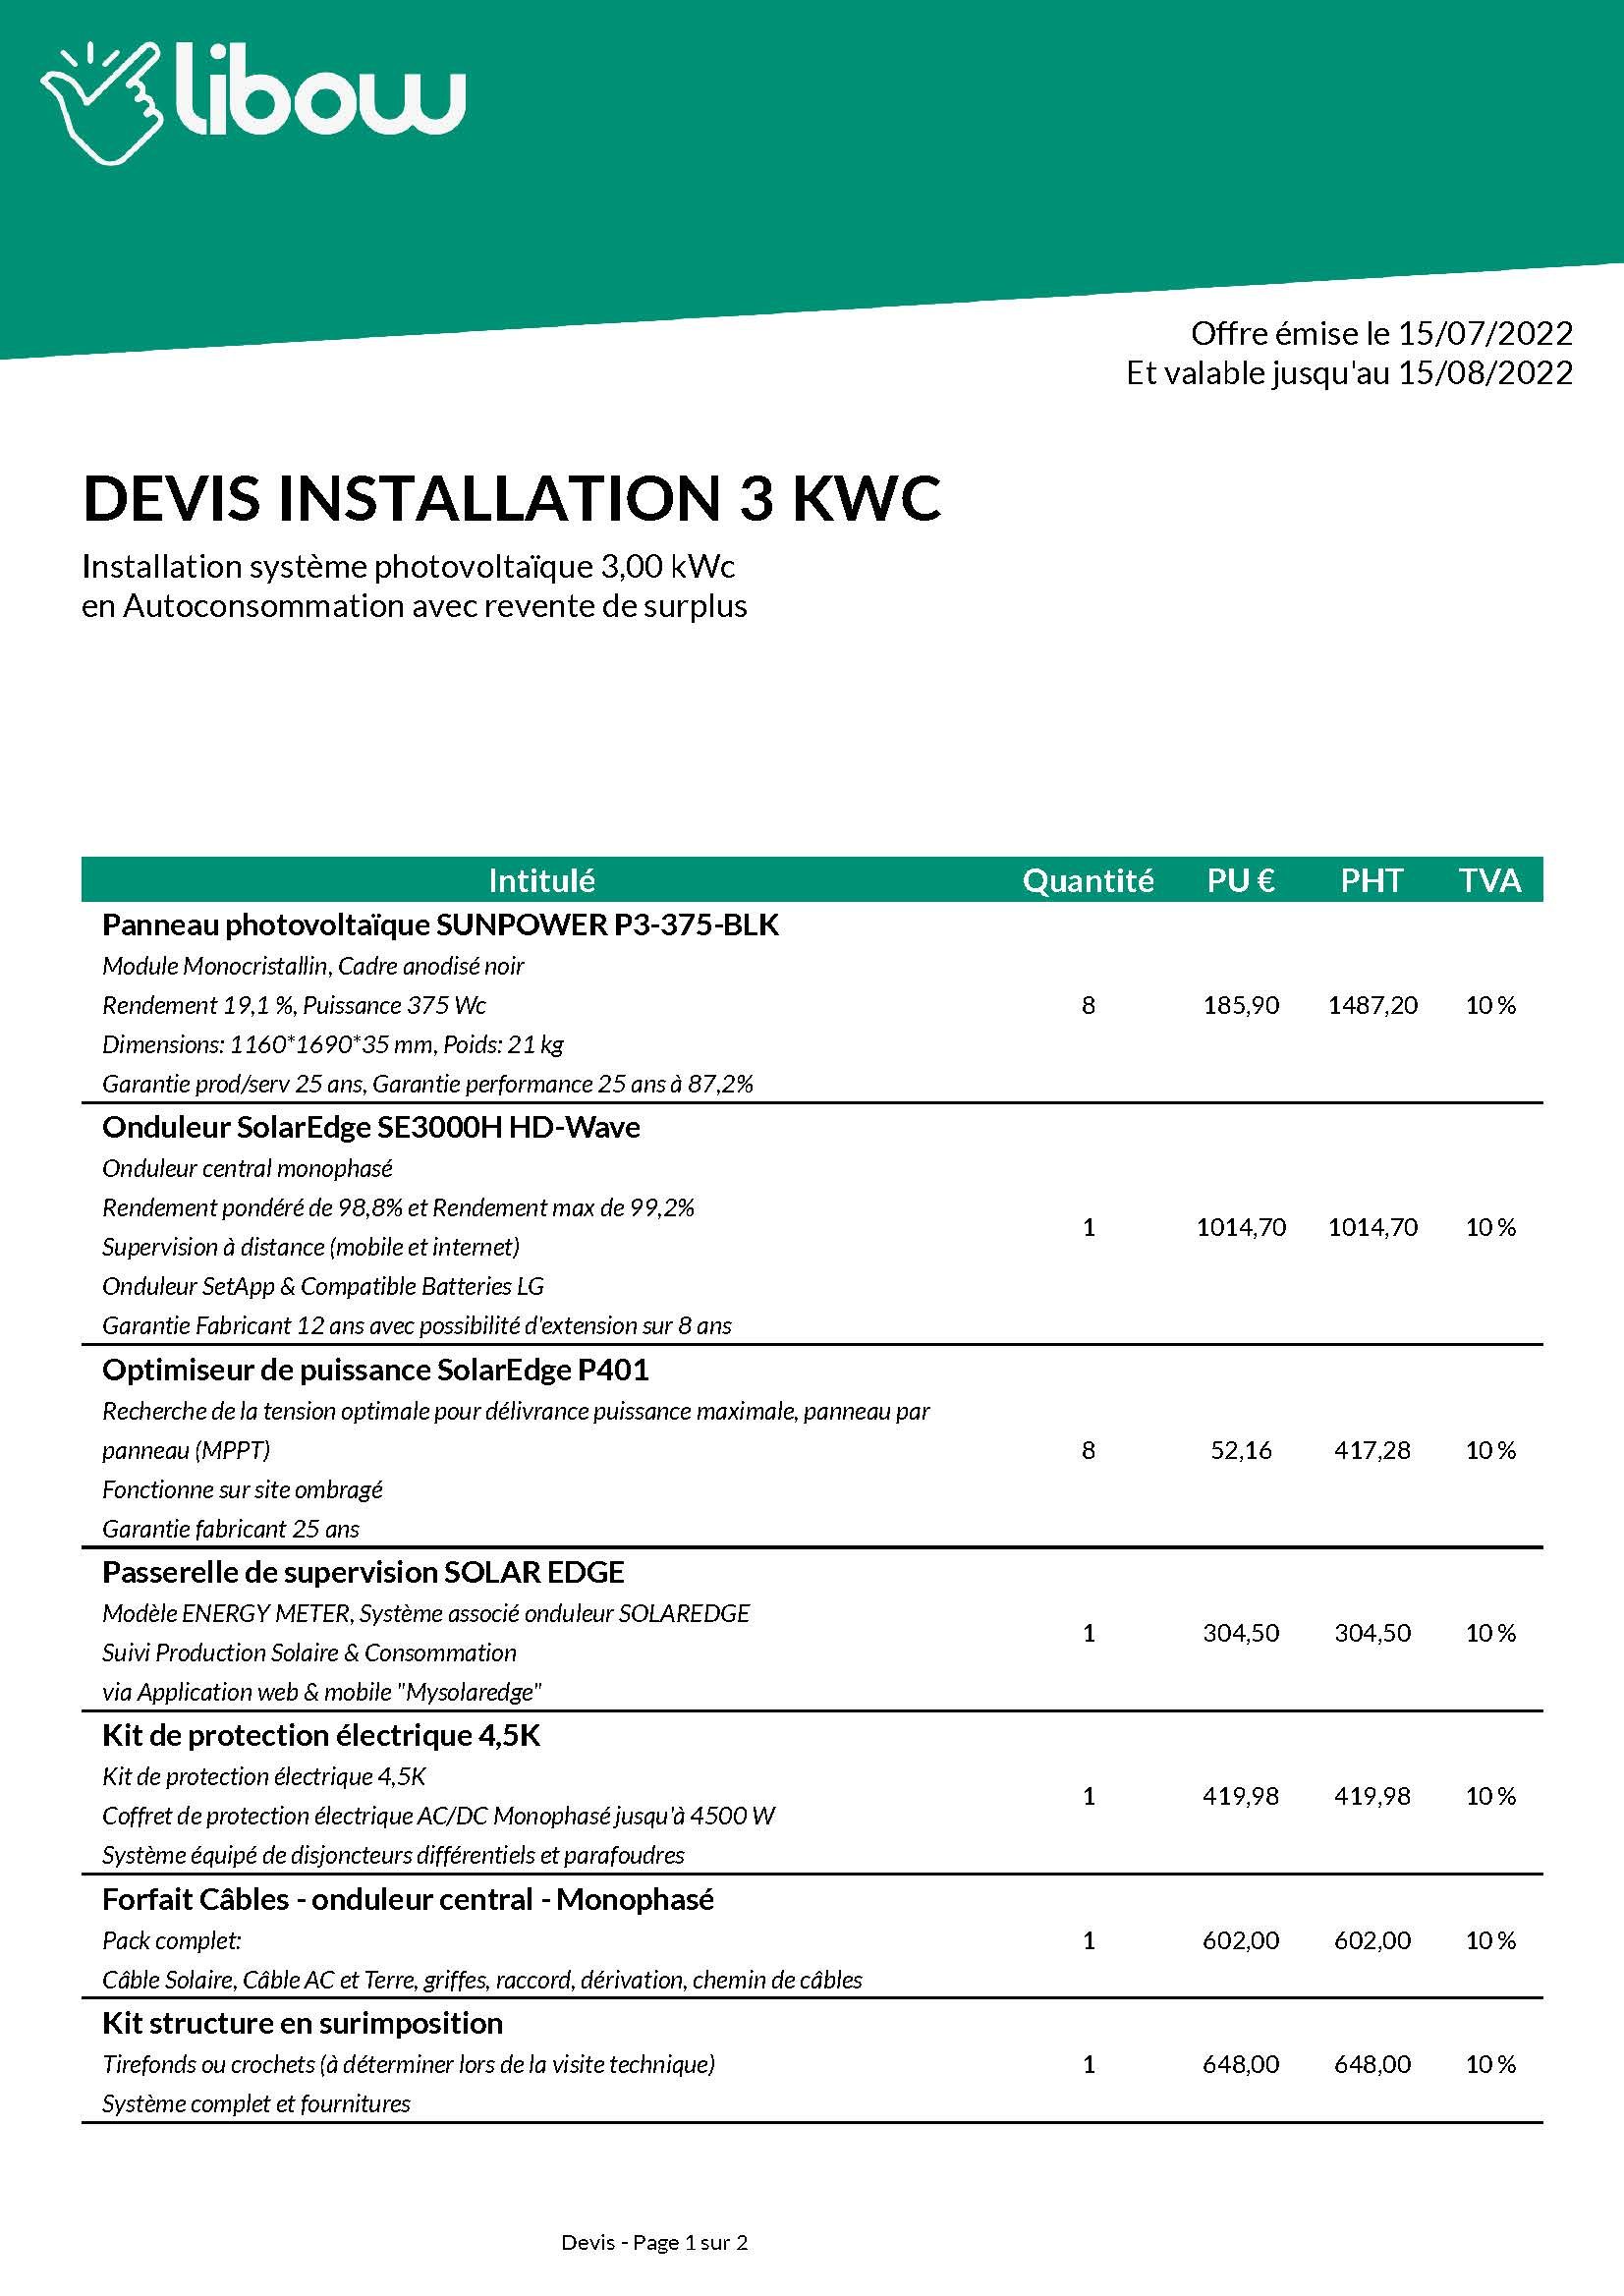 Devis exemple installation 3 kWc autoconsommation solaire Libow